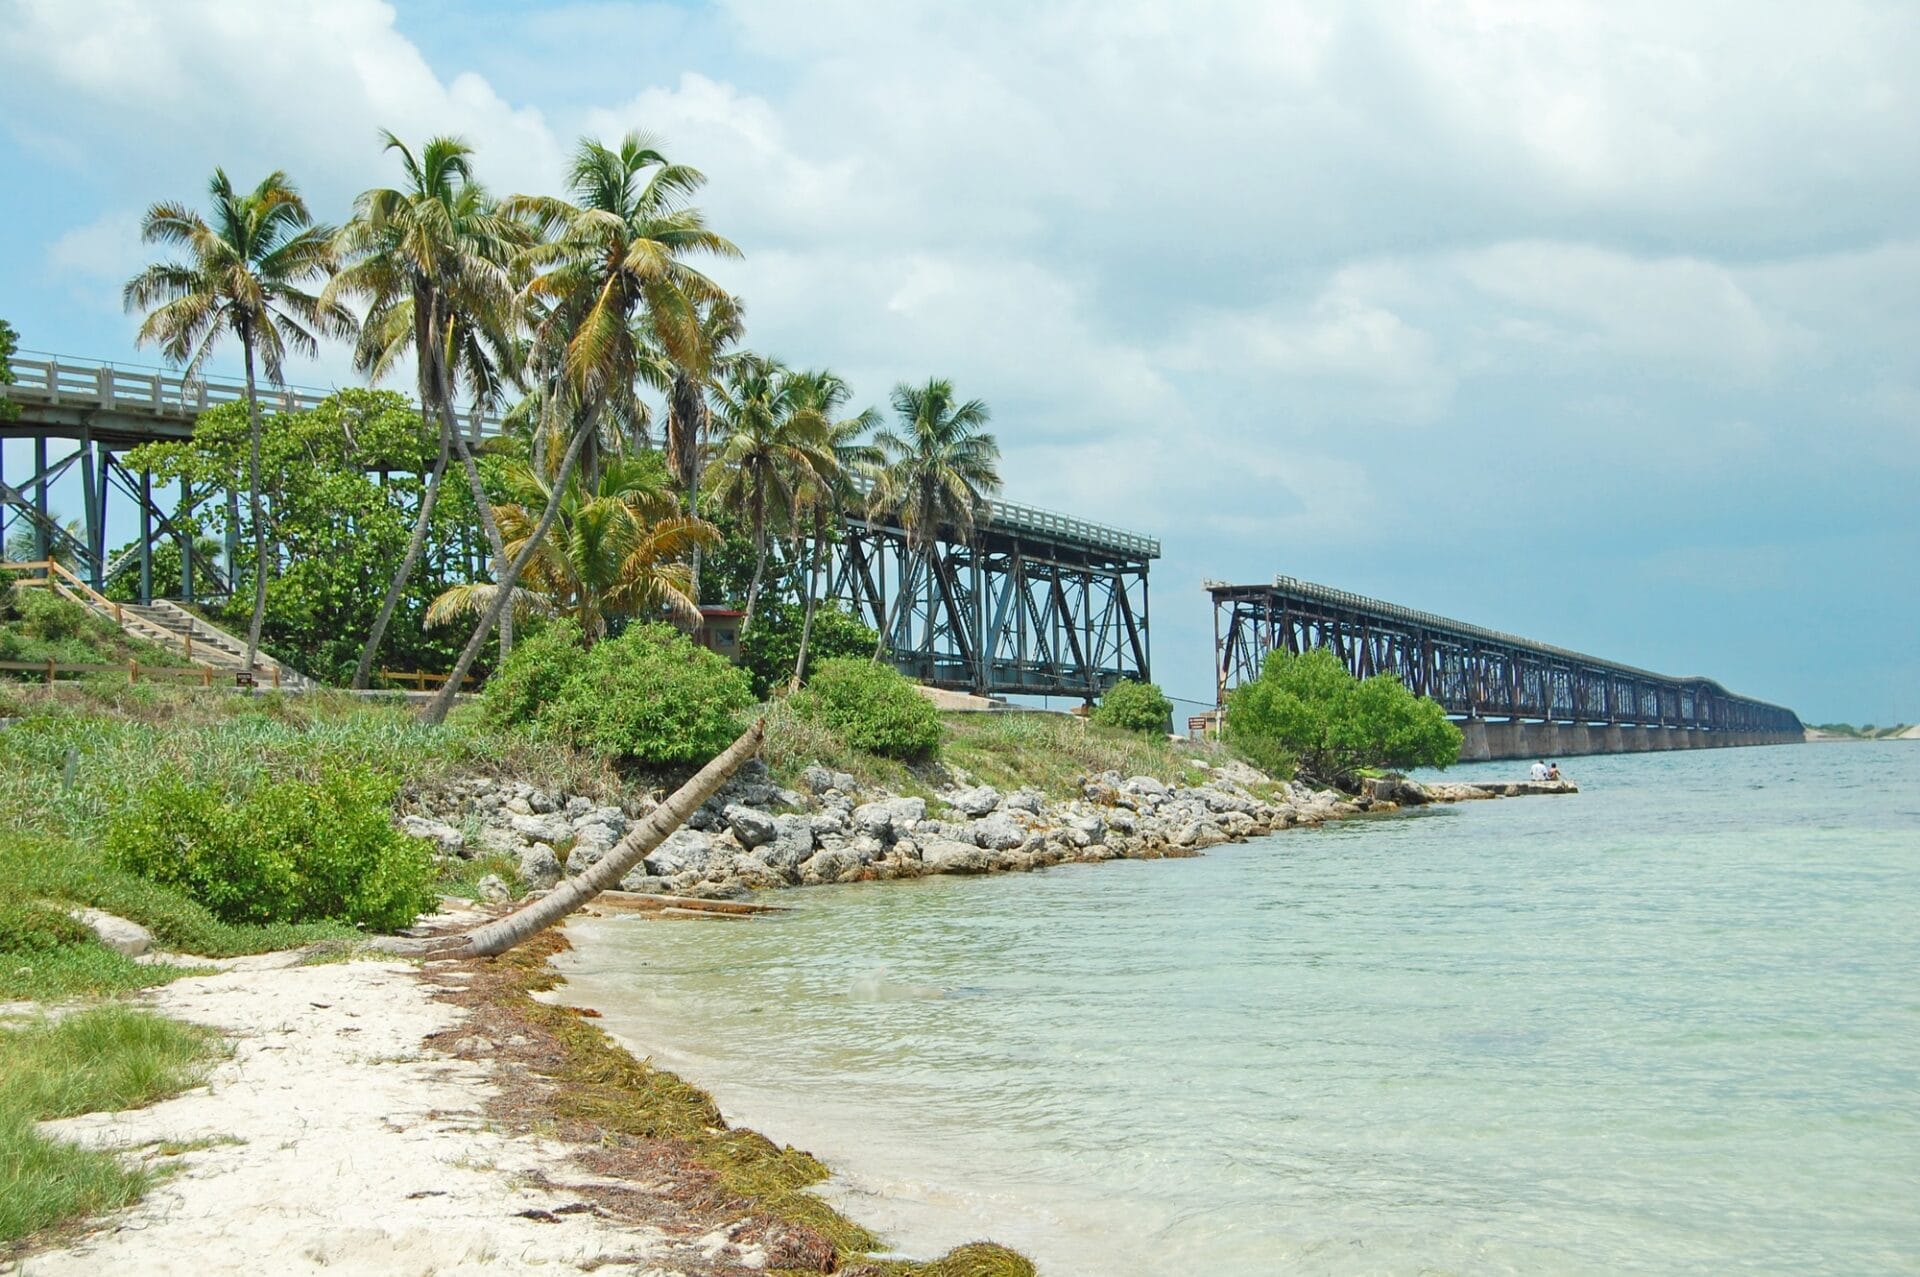 broken bridge surrounded by scrub palm trees and bordered by sand and ocean